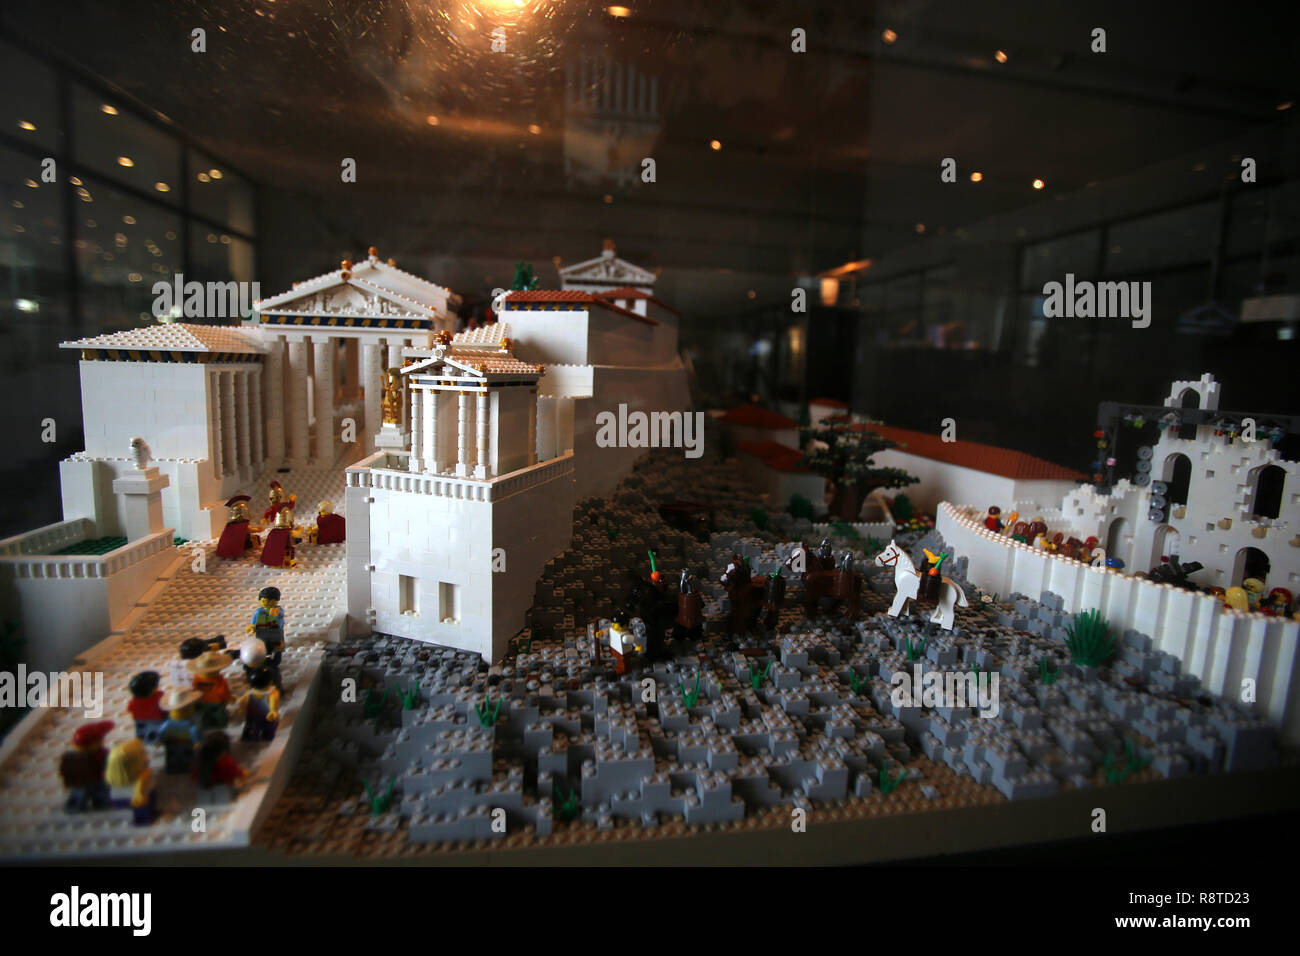 181217) -- ATHENS, Dec. 17, 2018 (Xinhua) -- The Acropolis maquette made  with Lego bricks is seen at the Acropolis Museum in Athens, Greece, on Dec.  17, 2018. The Acropolis maquette is